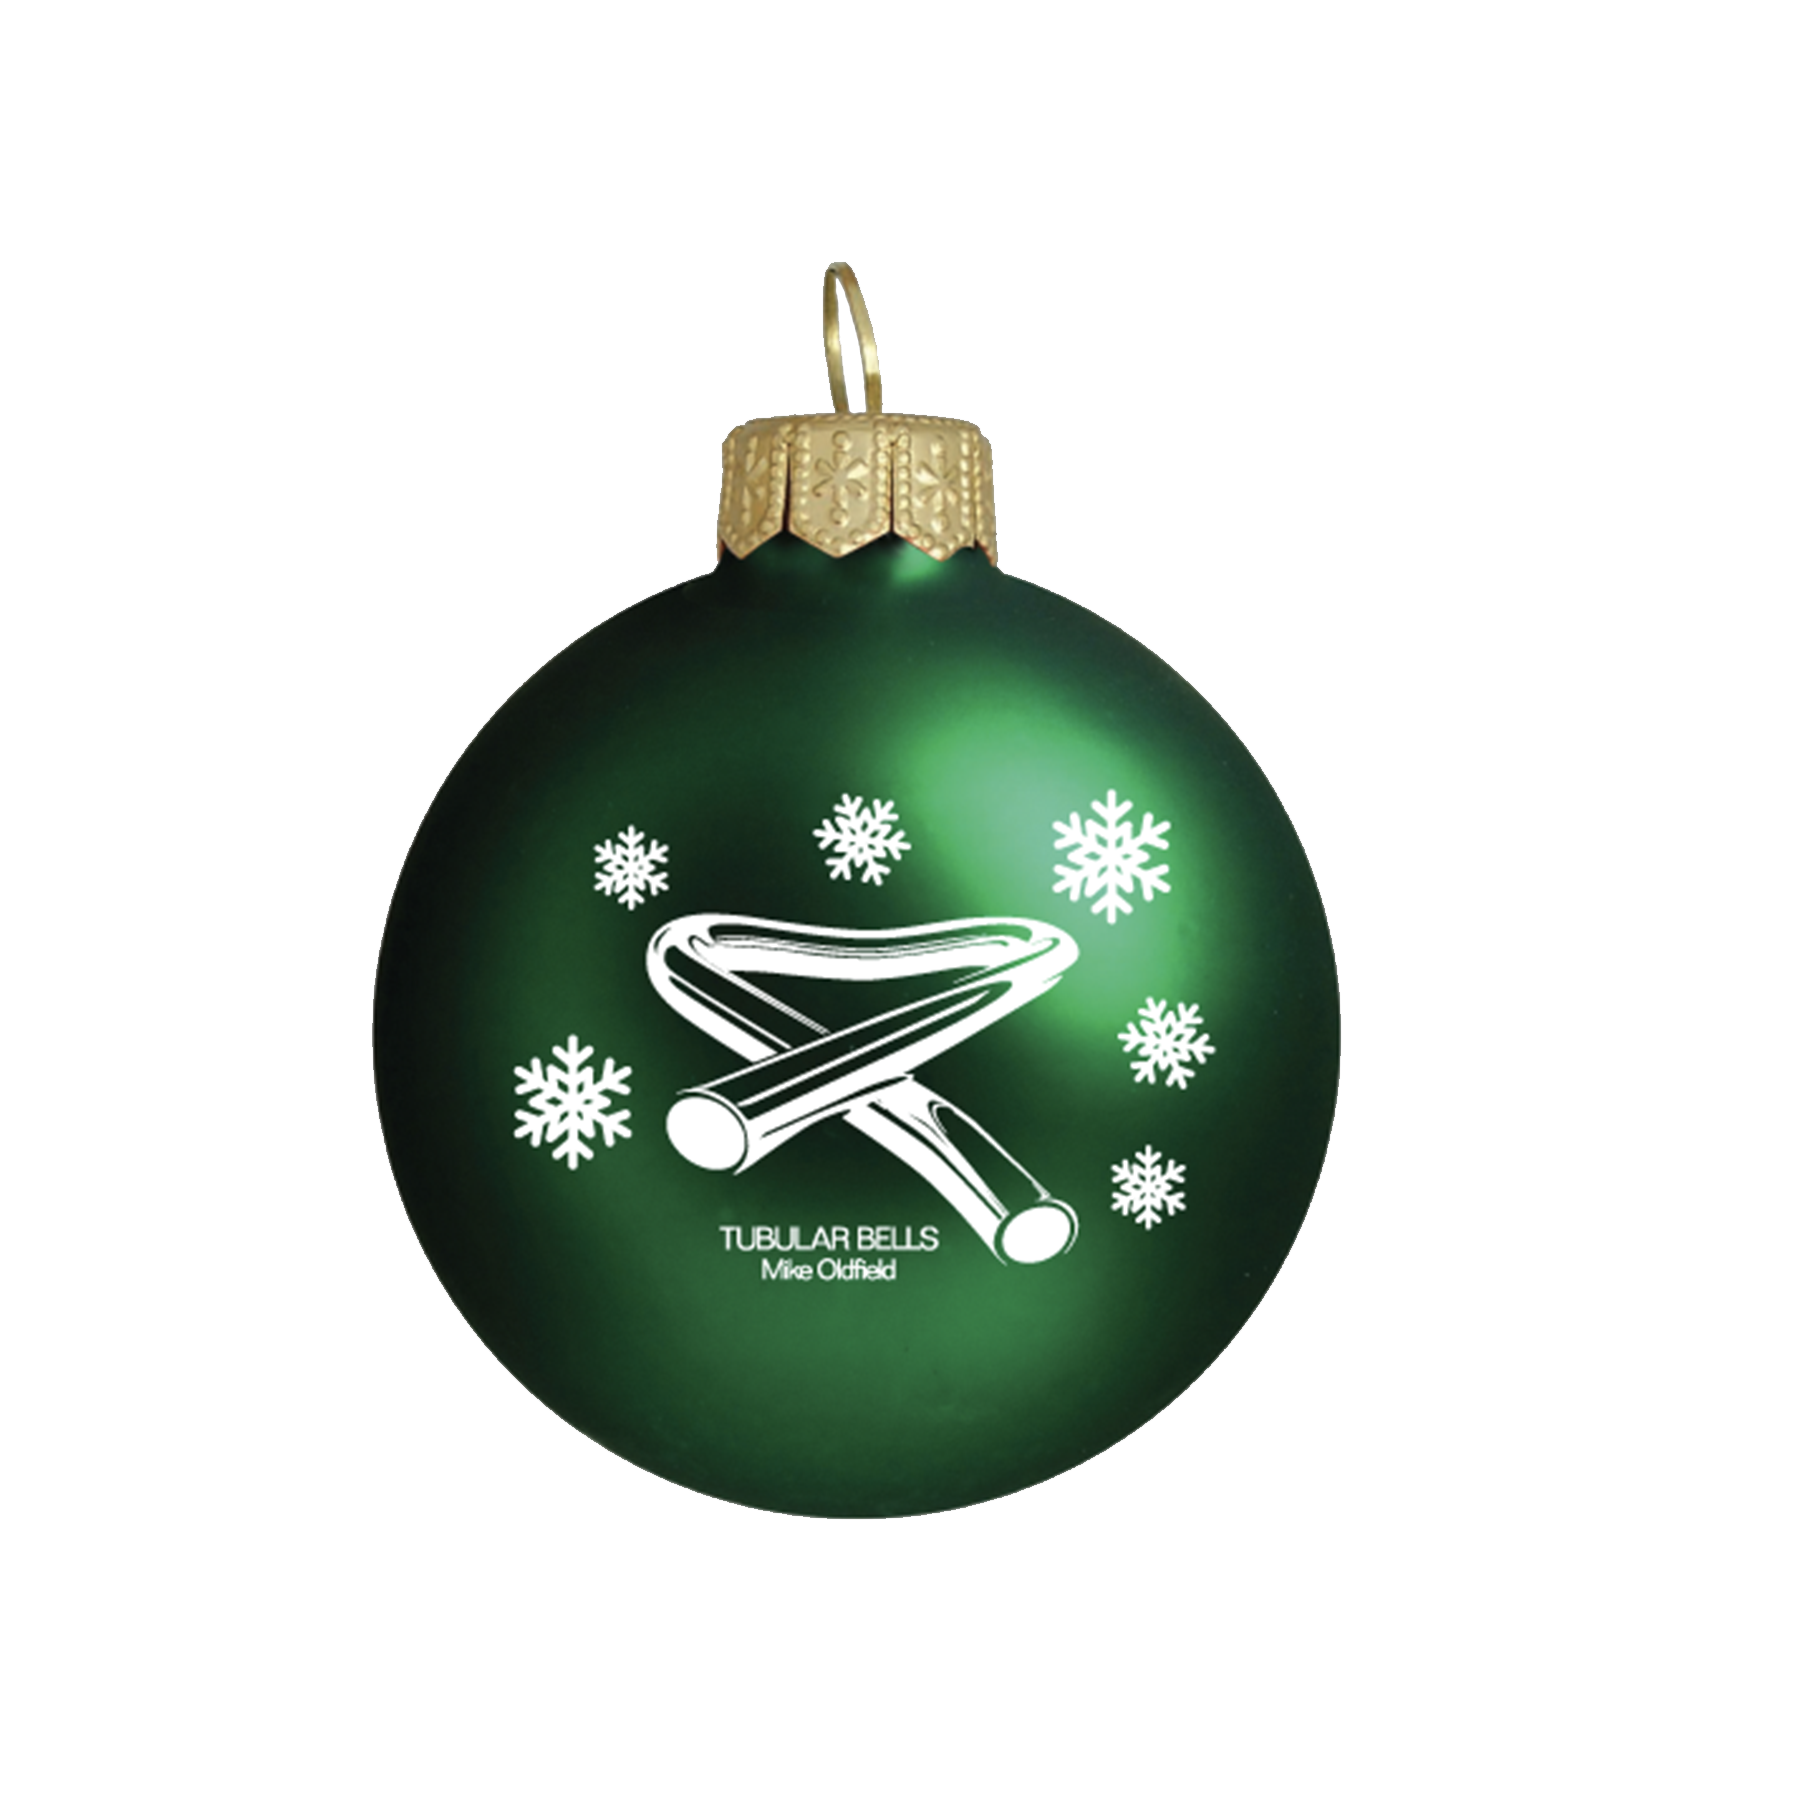 Mike Oldfield - Official Tubular Bells Christmas Bauble